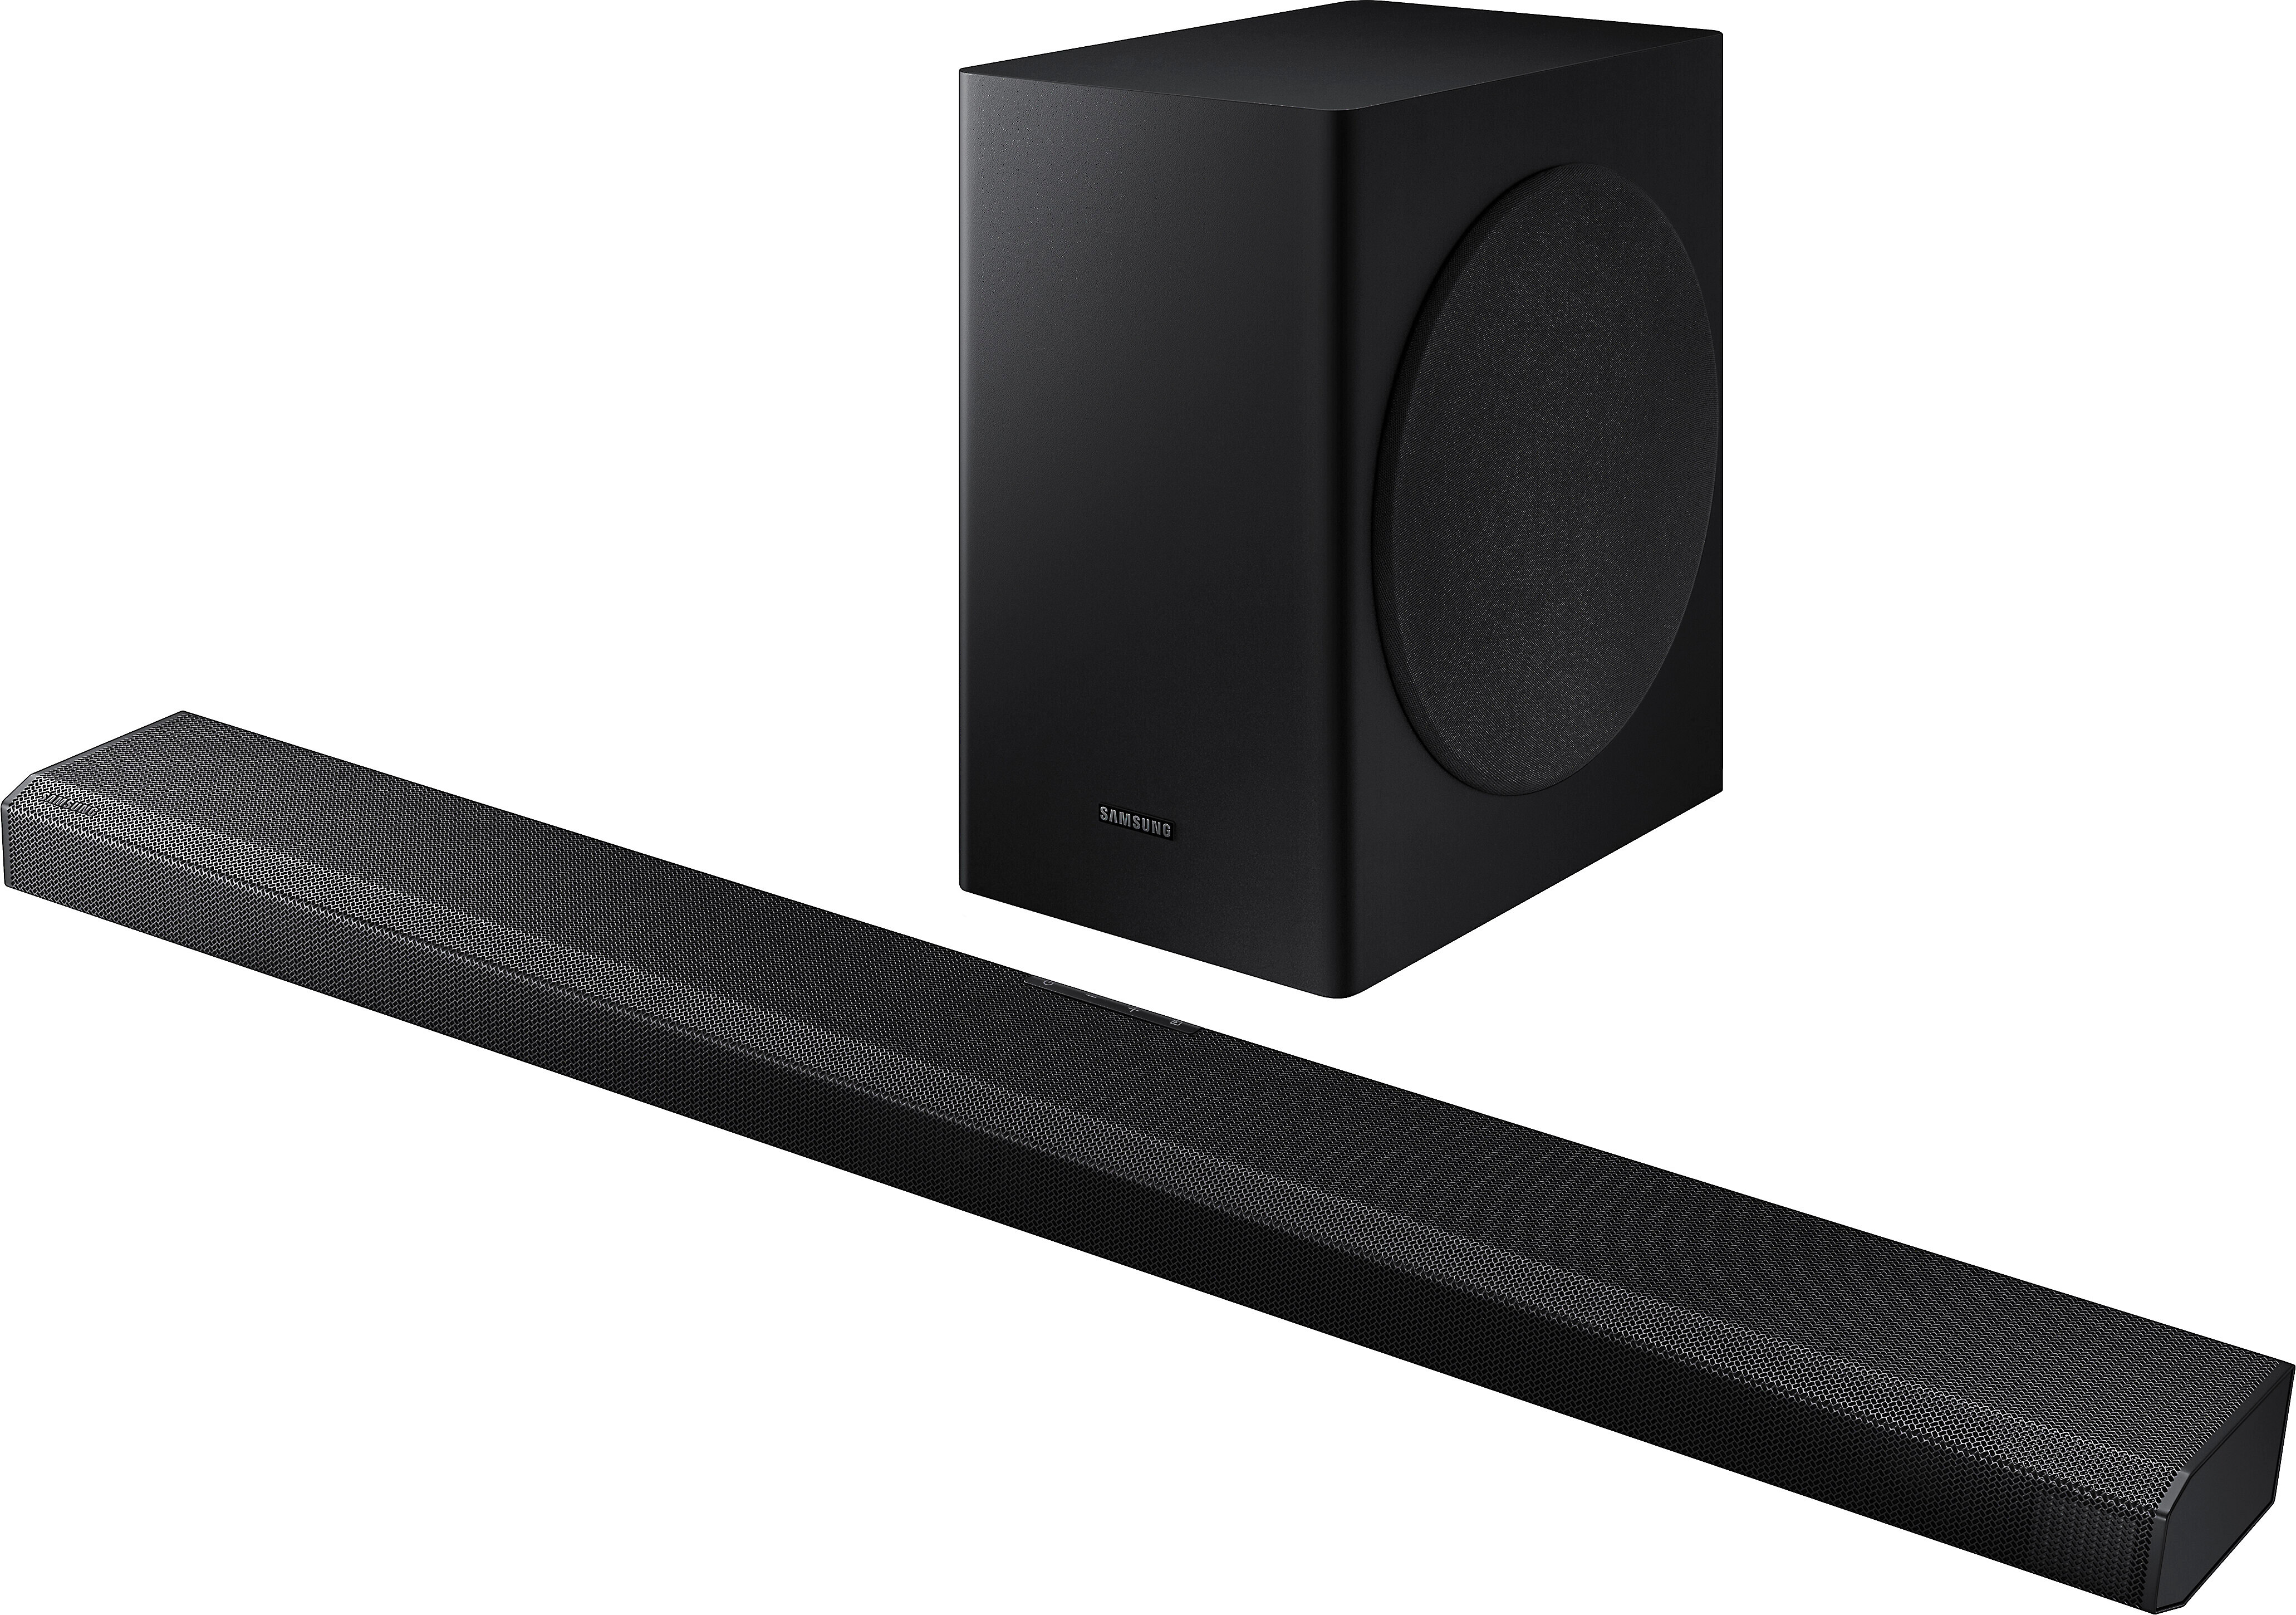 Kontrovers Forskelsbehandling Plante Customer Reviews: Samsung HW-Q70T Powered 3.1.2-channel sound bar and  wireless subwoofer system with Wi-Fi®, Bluetooth®, Dolby Atmos®, and DTS:X  at Crutchfield